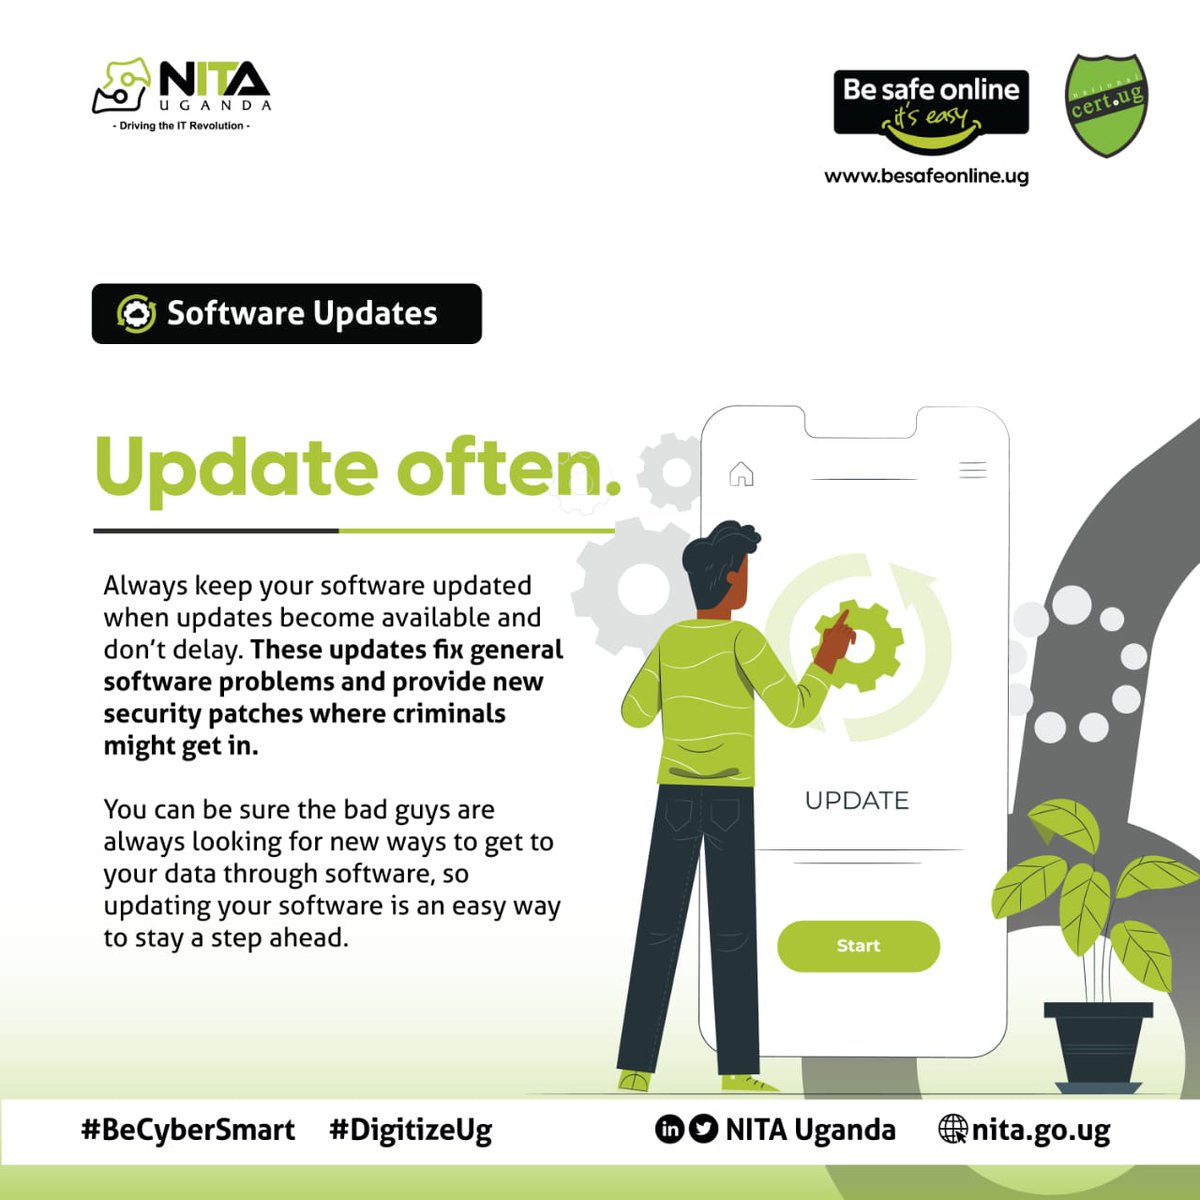 #CybersecurityAwarenessMonth One of the easiest ways to keep information secure is to keep your software and apps updated. The updates fix general software problems and provide new security patches where criminals might get in. #BeCyerSmart #DigitizeUG